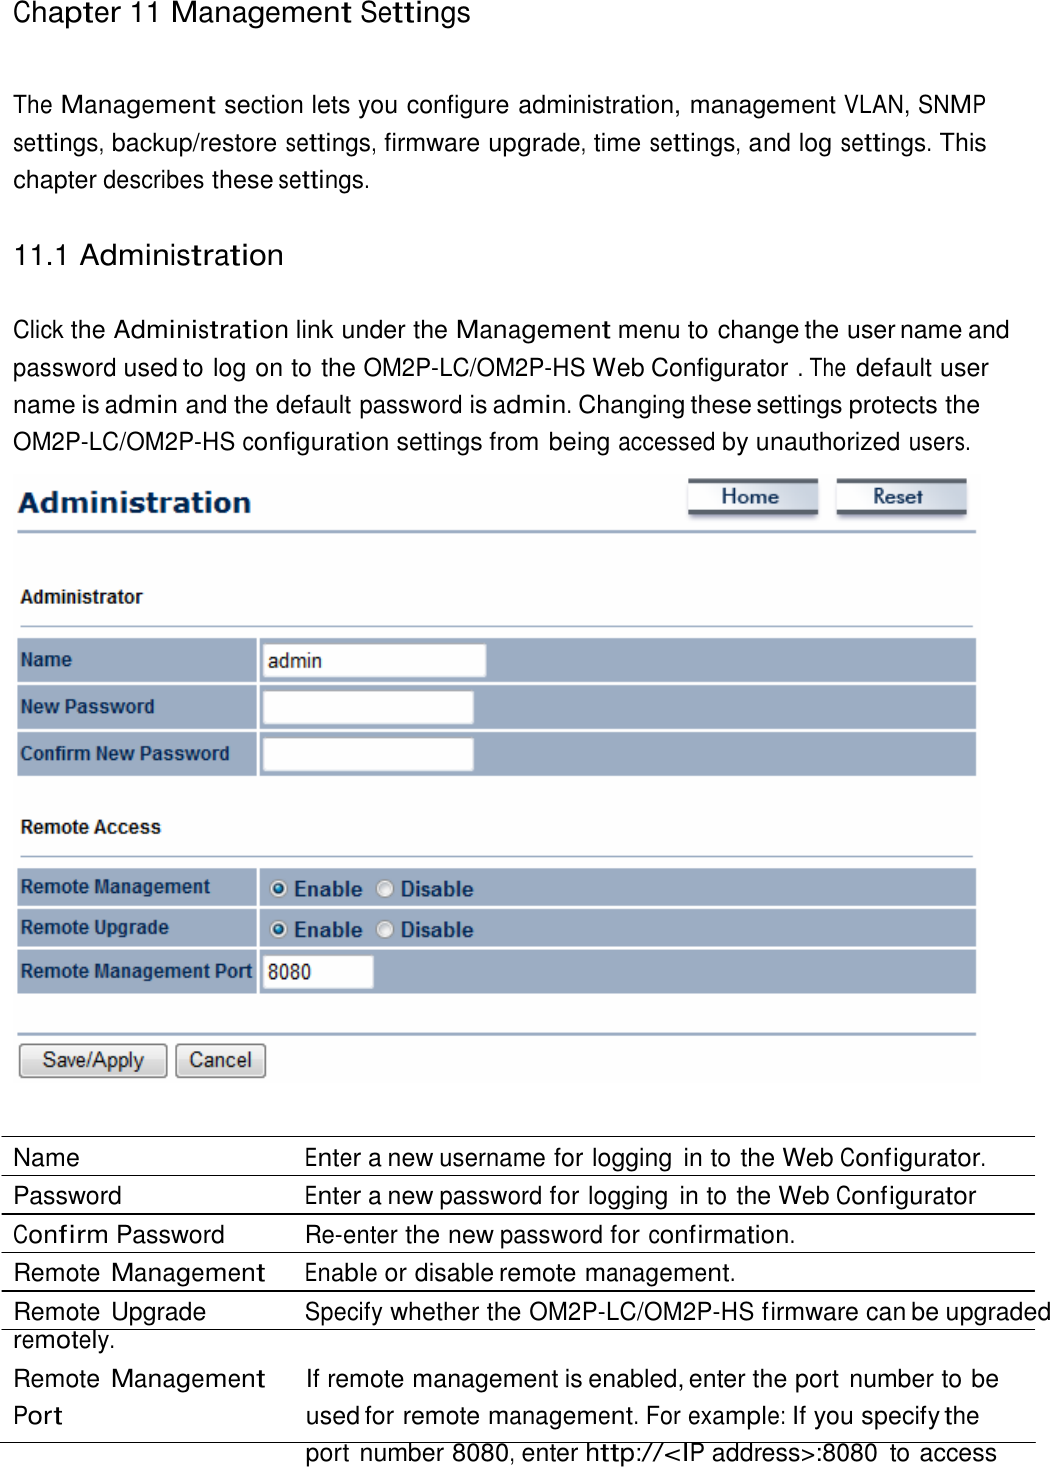 Chapter 11 Management Settings     The Management section lets you configure administration, management VLAN, SNMP settings, backup/restore settings, firmware upgrade, time settings, and log settings. This chapter describes these settings.   11.1 Administration   Click the Administration link under the Management menu to change the user name and password used to log on to the OM2P-LC/OM2P-HS Web Configurator . The default user name is admin and the default password is admin. Changing these settings protects the OM2P-LC/OM2P-HS configuration settings from being accessed by unauthorized users.     Name  Enter a new username for logging  in to the Web Configurator. Password  Enter a new password for logging  in to the Web Configurator Confirm Password  Re-enter the new password for confirmation. Remote Management Enable or disable remote management. Remote Upgrade  Specify whether the OM2P-LC/OM2P-HS firmware can be upgraded remotely. Remote Management Port If remote management is enabled, enter the port number to be used for remote management. For example: If you specify the port number 8080, enter http://&lt;IP address&gt;:8080  to access 